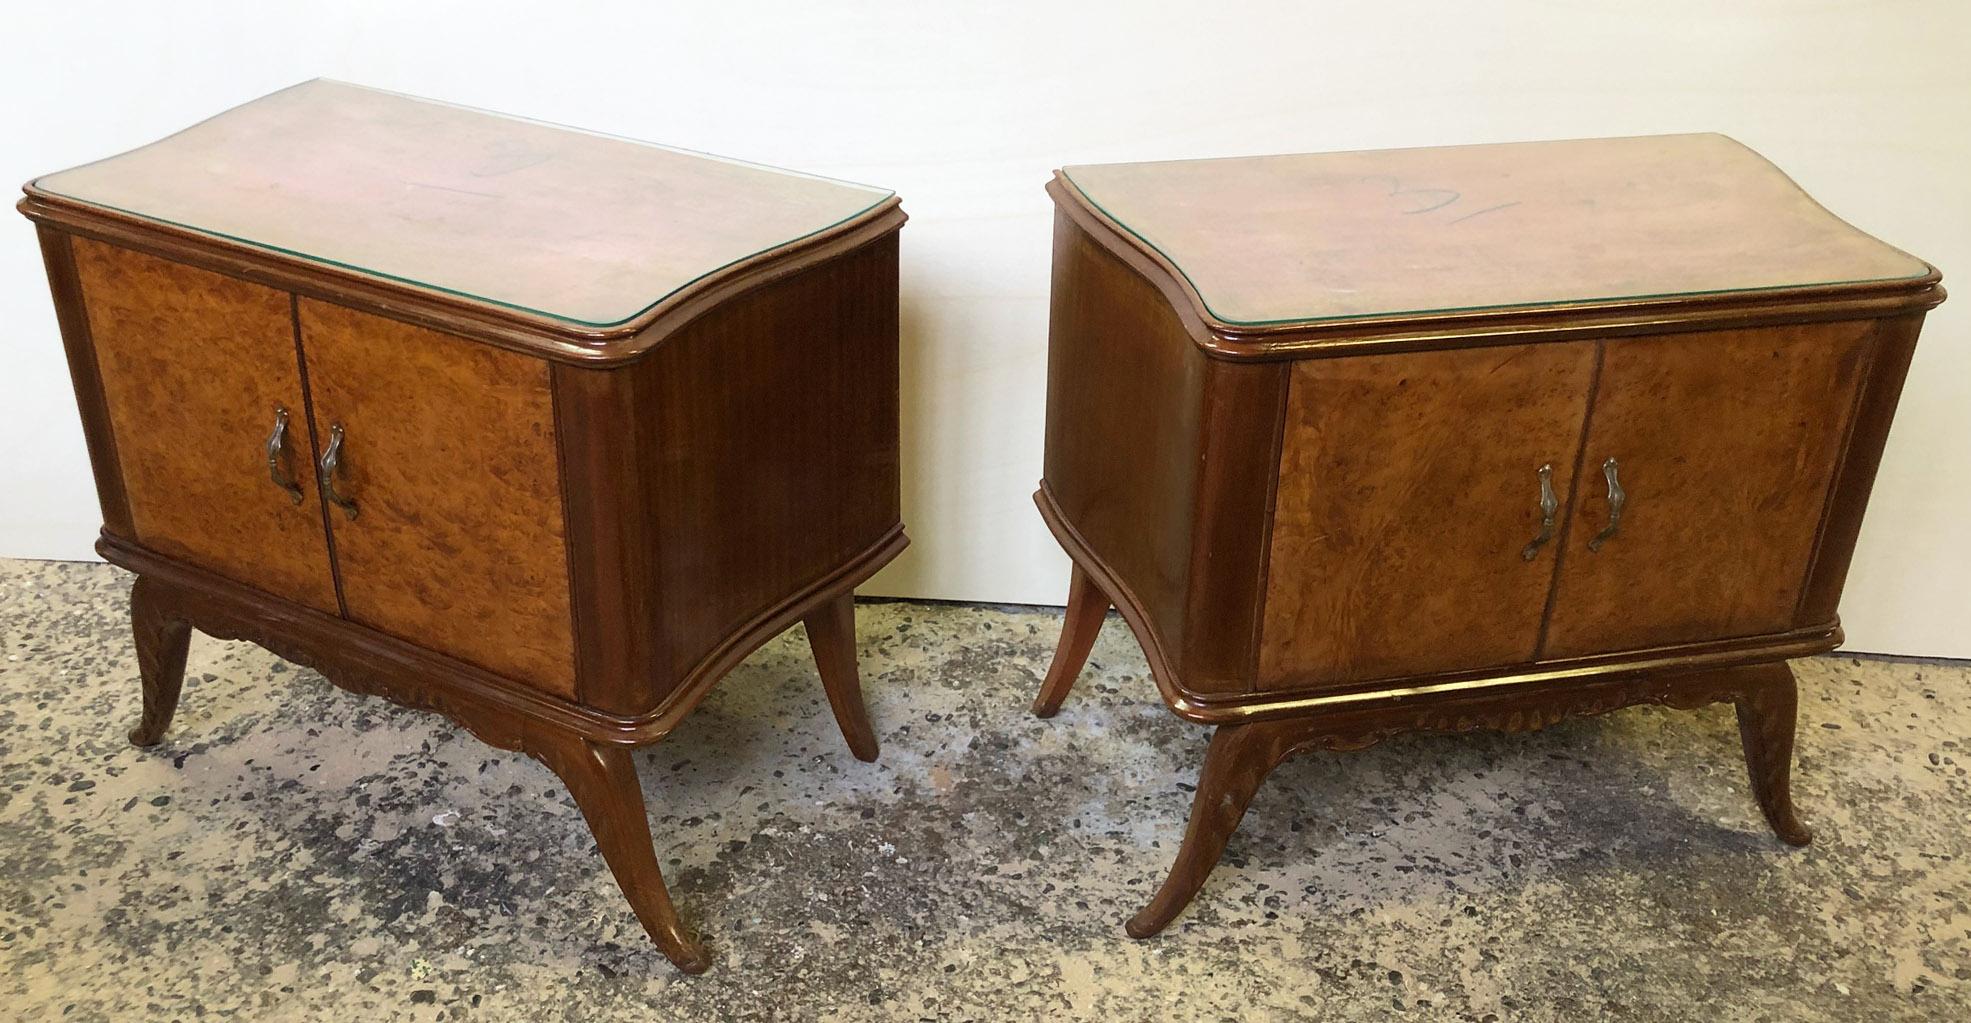 Pair of uncommon and  briar wood  night stands from 1960, Italian originals. 
Transparent glass top.
In the past, there were parts of the newspaper of the time under the glass.
Coming from a villa of Forte dei Marmi area of Tuscany.
As shown in the